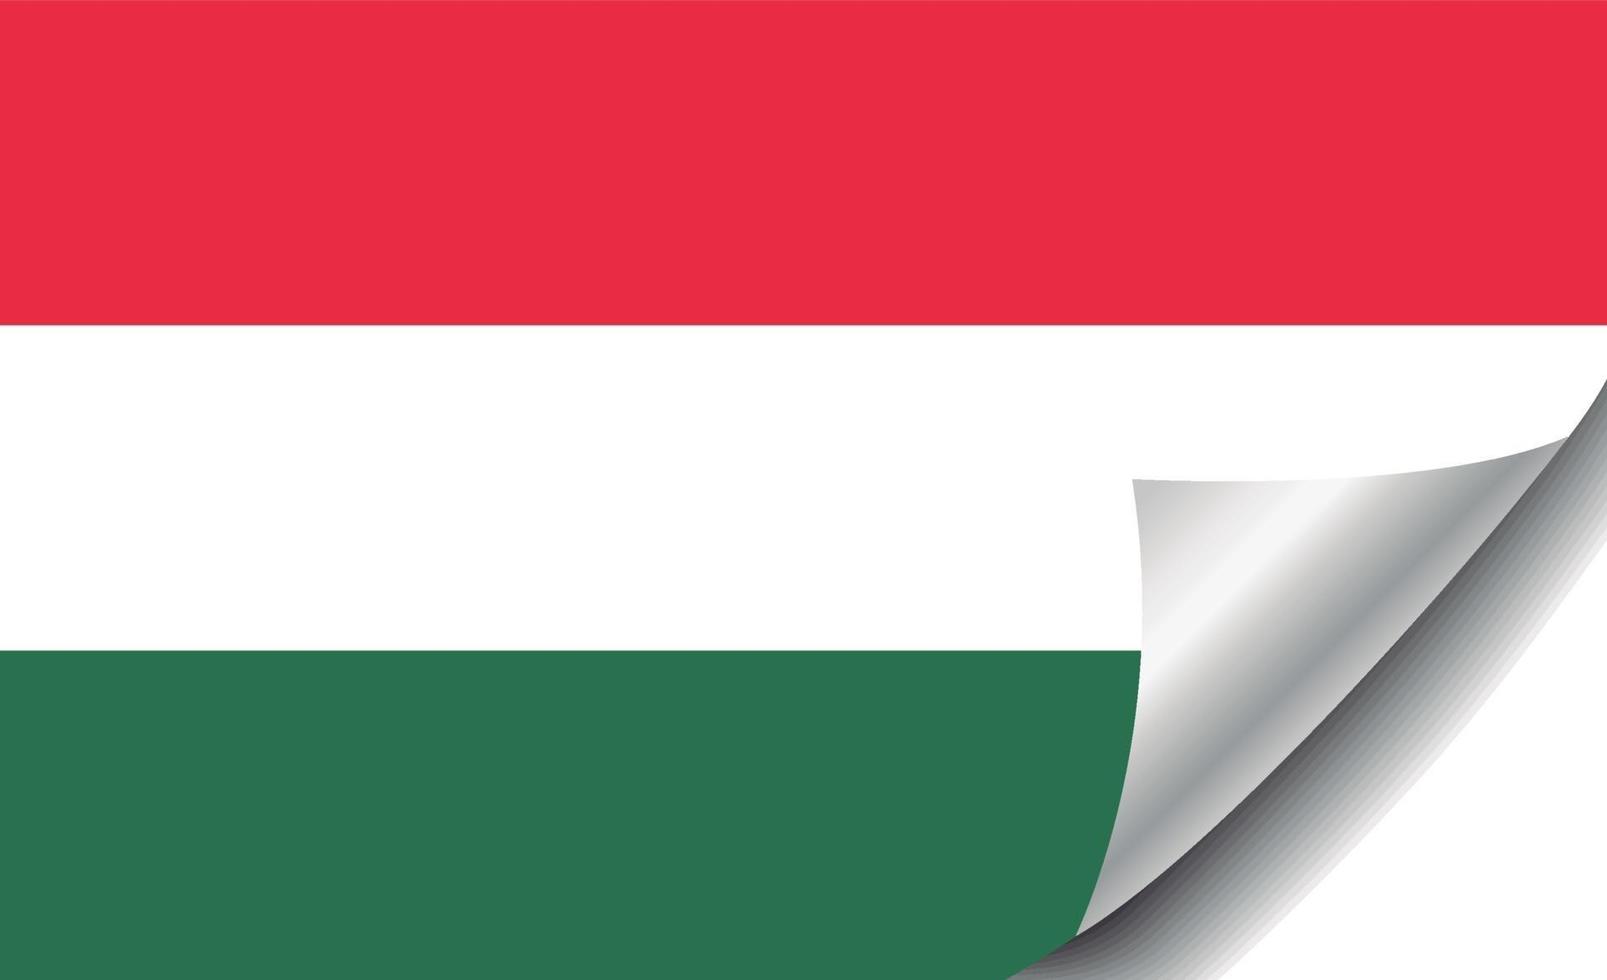 Hungary flag with curled corner vector